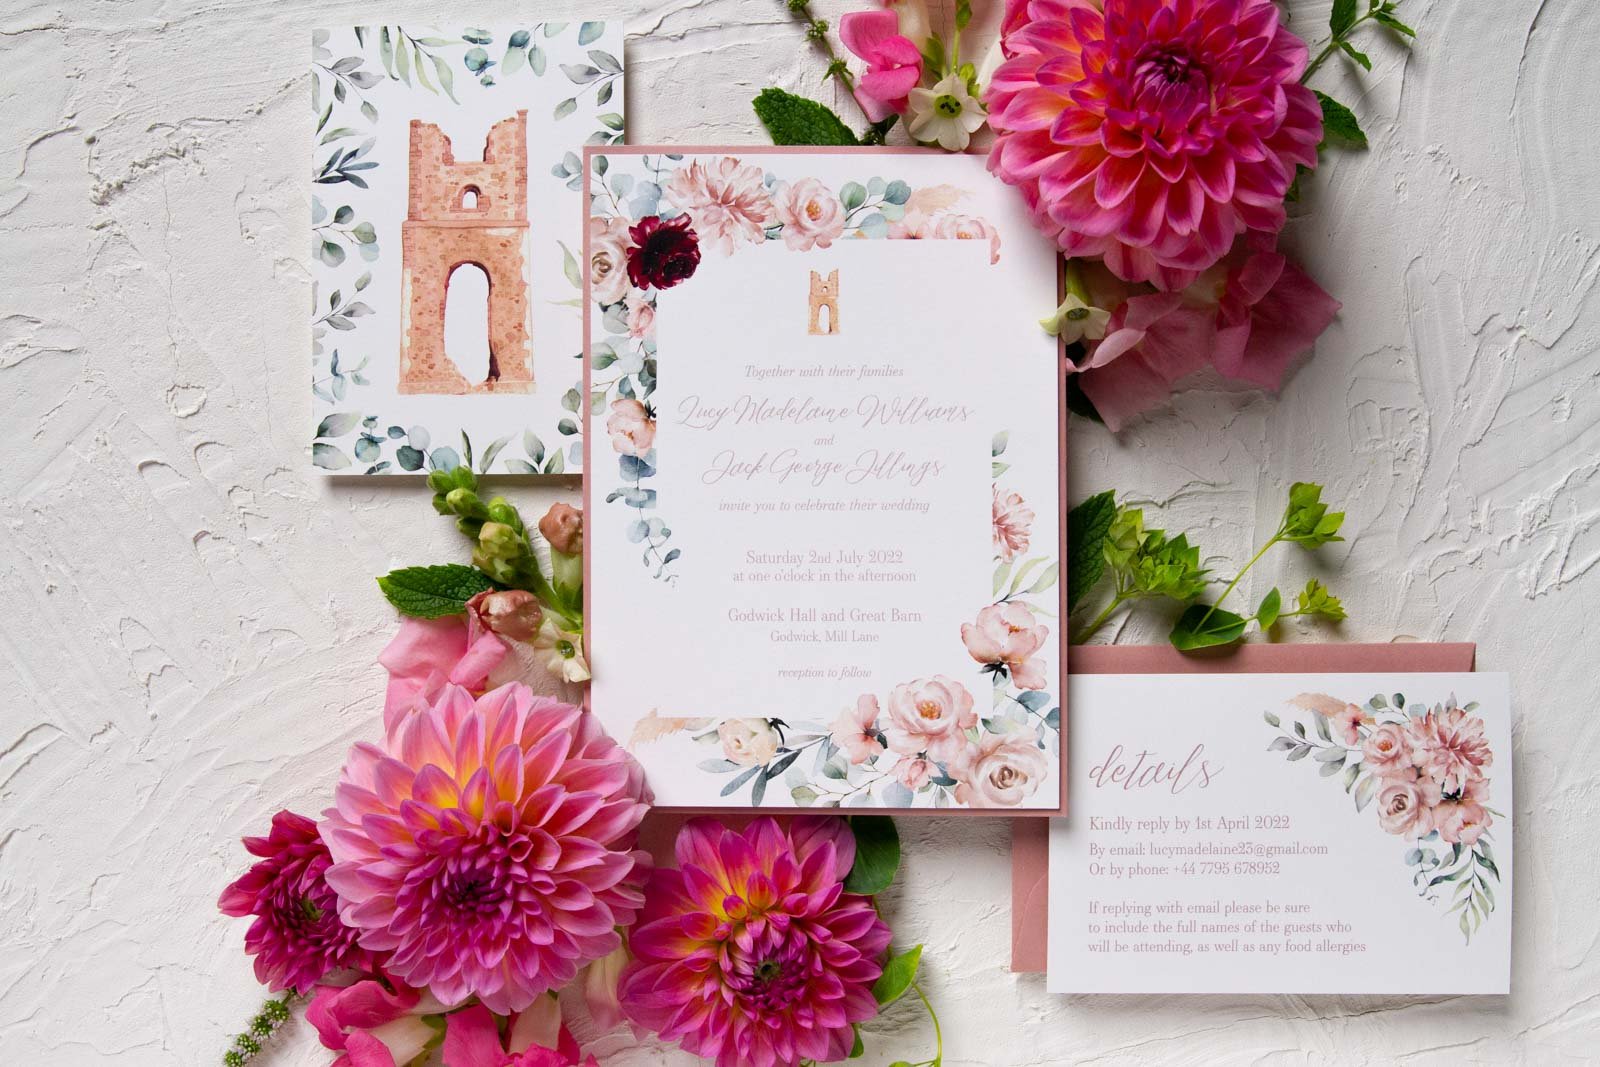 Blush-pink-and-dusty-rose-watercolour-florals-custom-wedding-invitation-and-double-sided-details-card-with-watercolour-venue-illustration-3.jpg